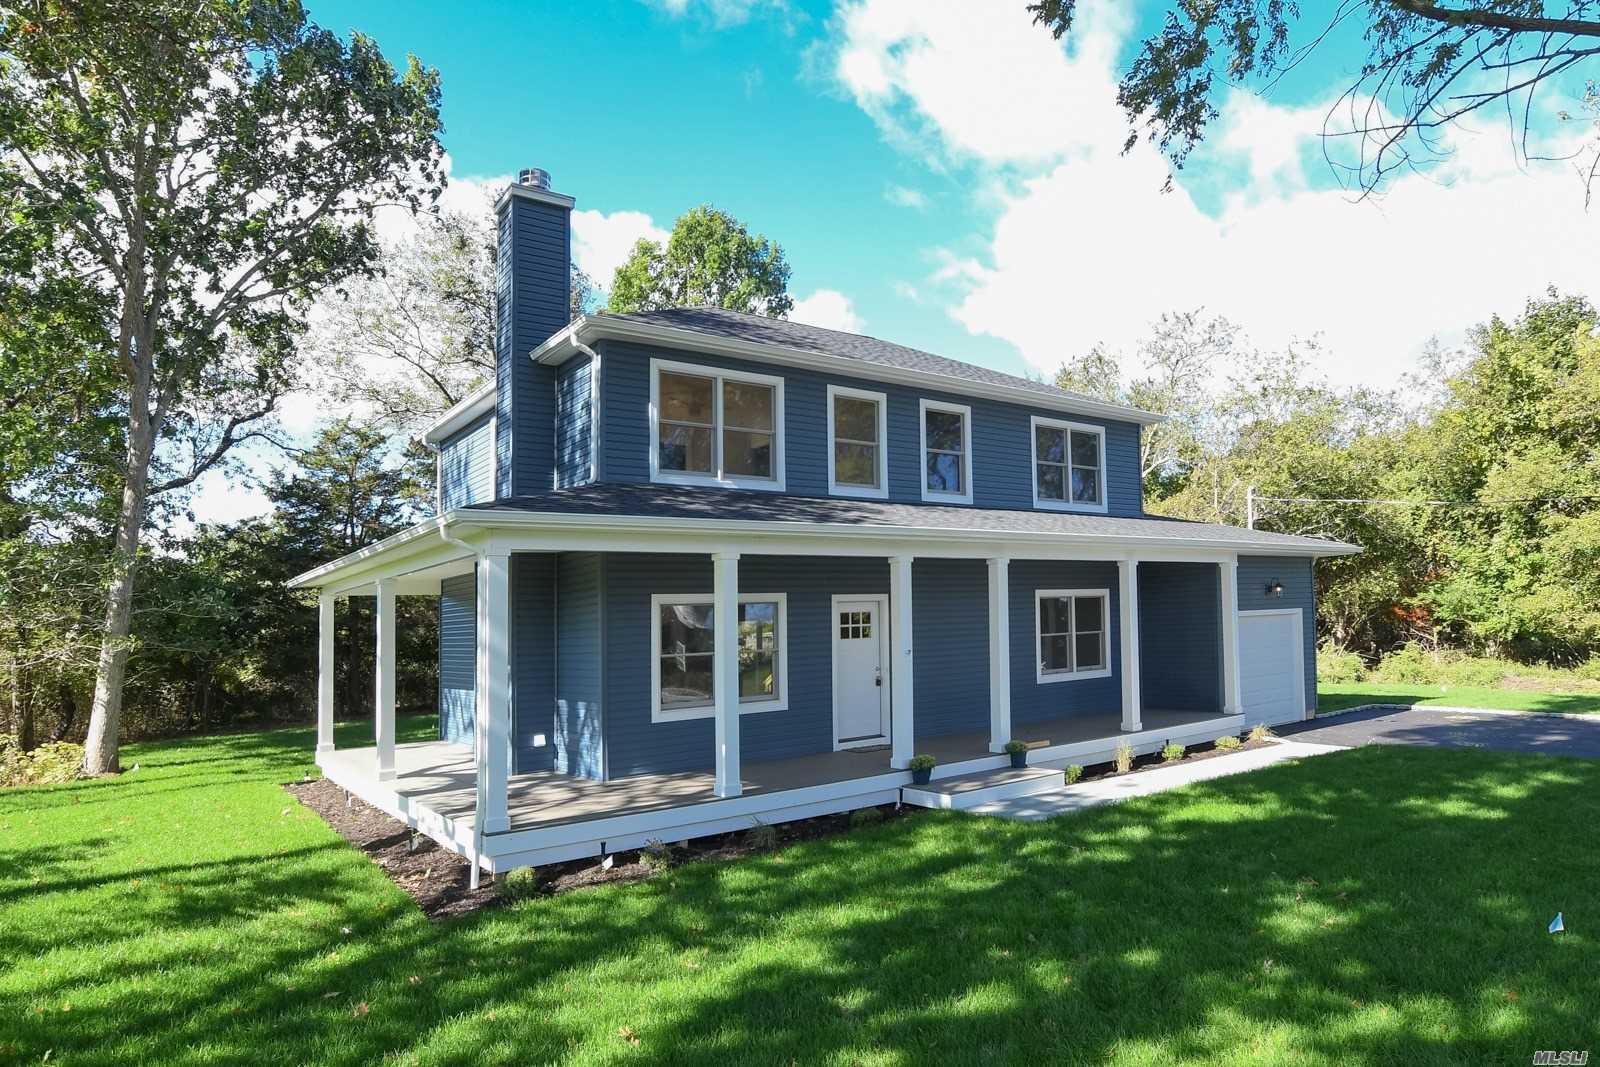 Beautifully constructed Brand new home in picture perfect area. Waterviews from your wrap- around porch. Two close pathways to beaches with superior views of Shelter Island. Room for pool too!! The Seaside Village of Greenport is a short distance away! Check back for professional photos.